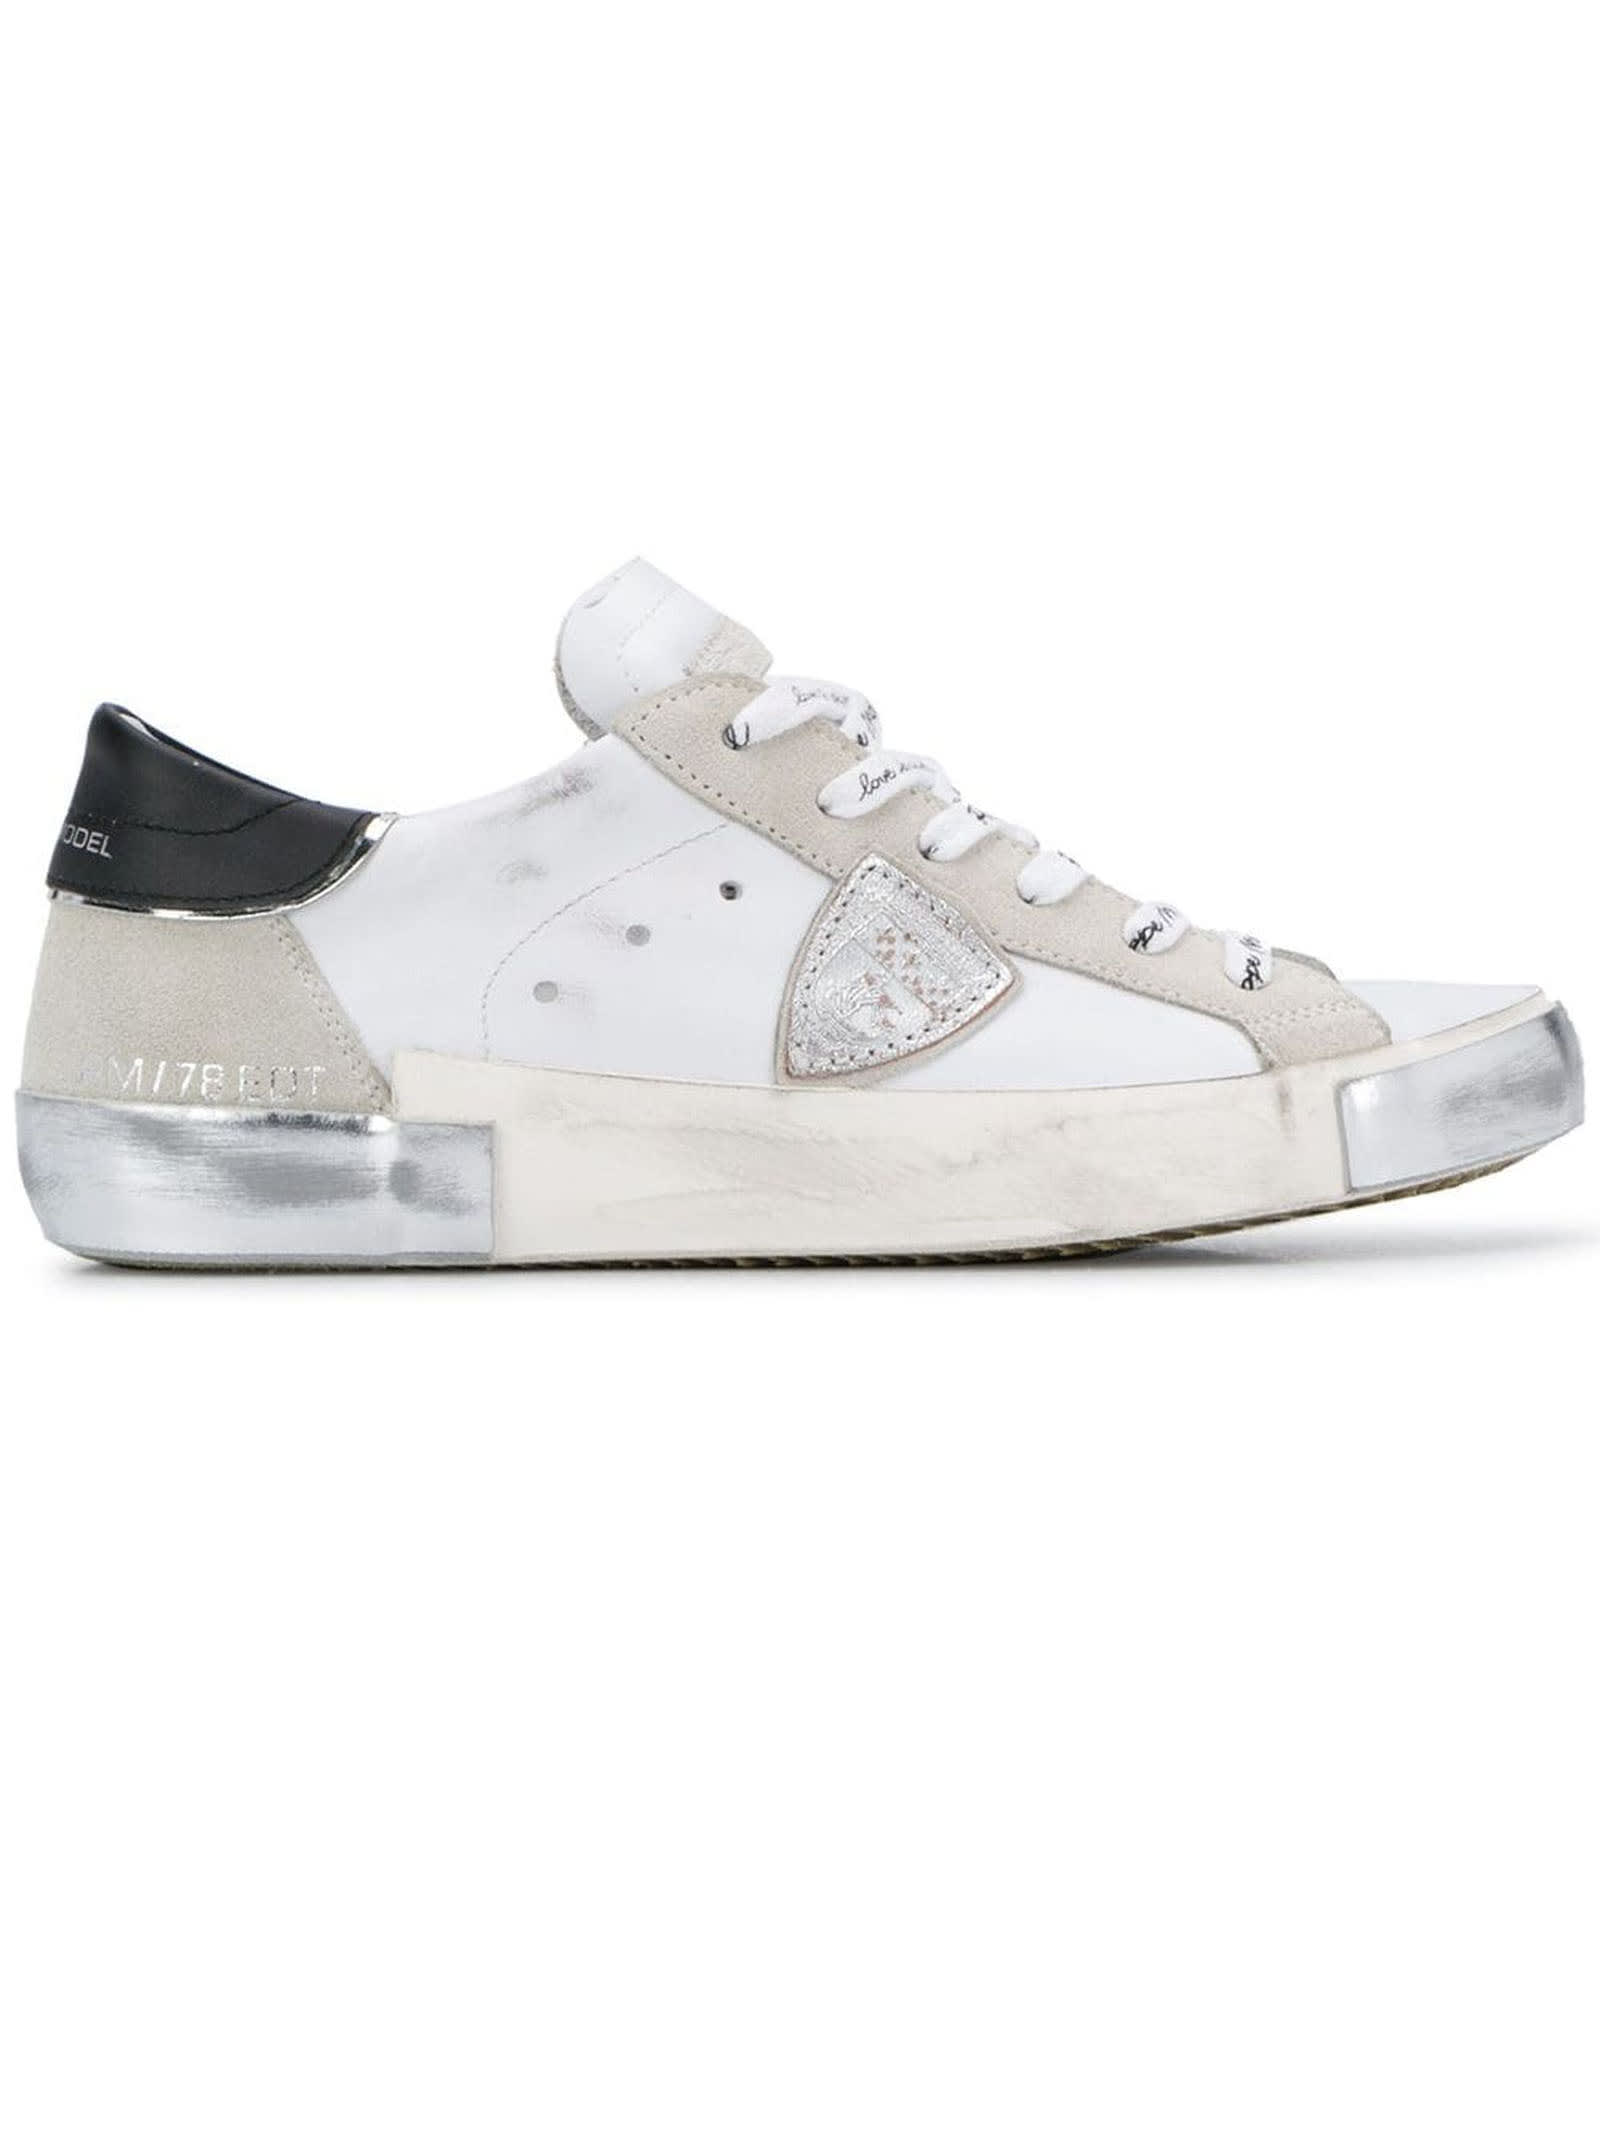 Philippe Model White Leather Prsx Sneakers